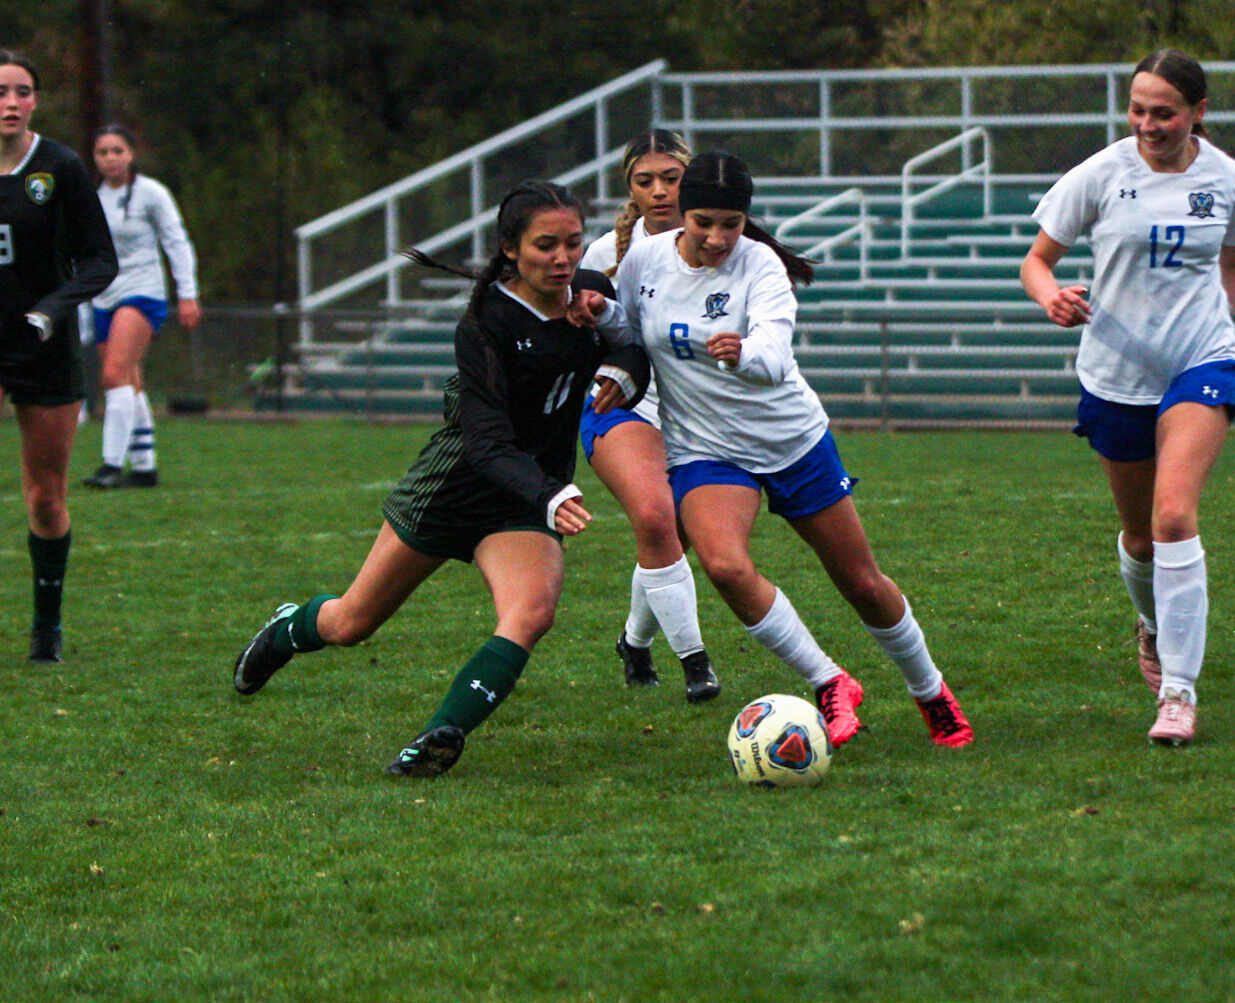 Manitou Springs Girls Soccer Triumphs with 3-0 Victory over Englewood in 3A Opener